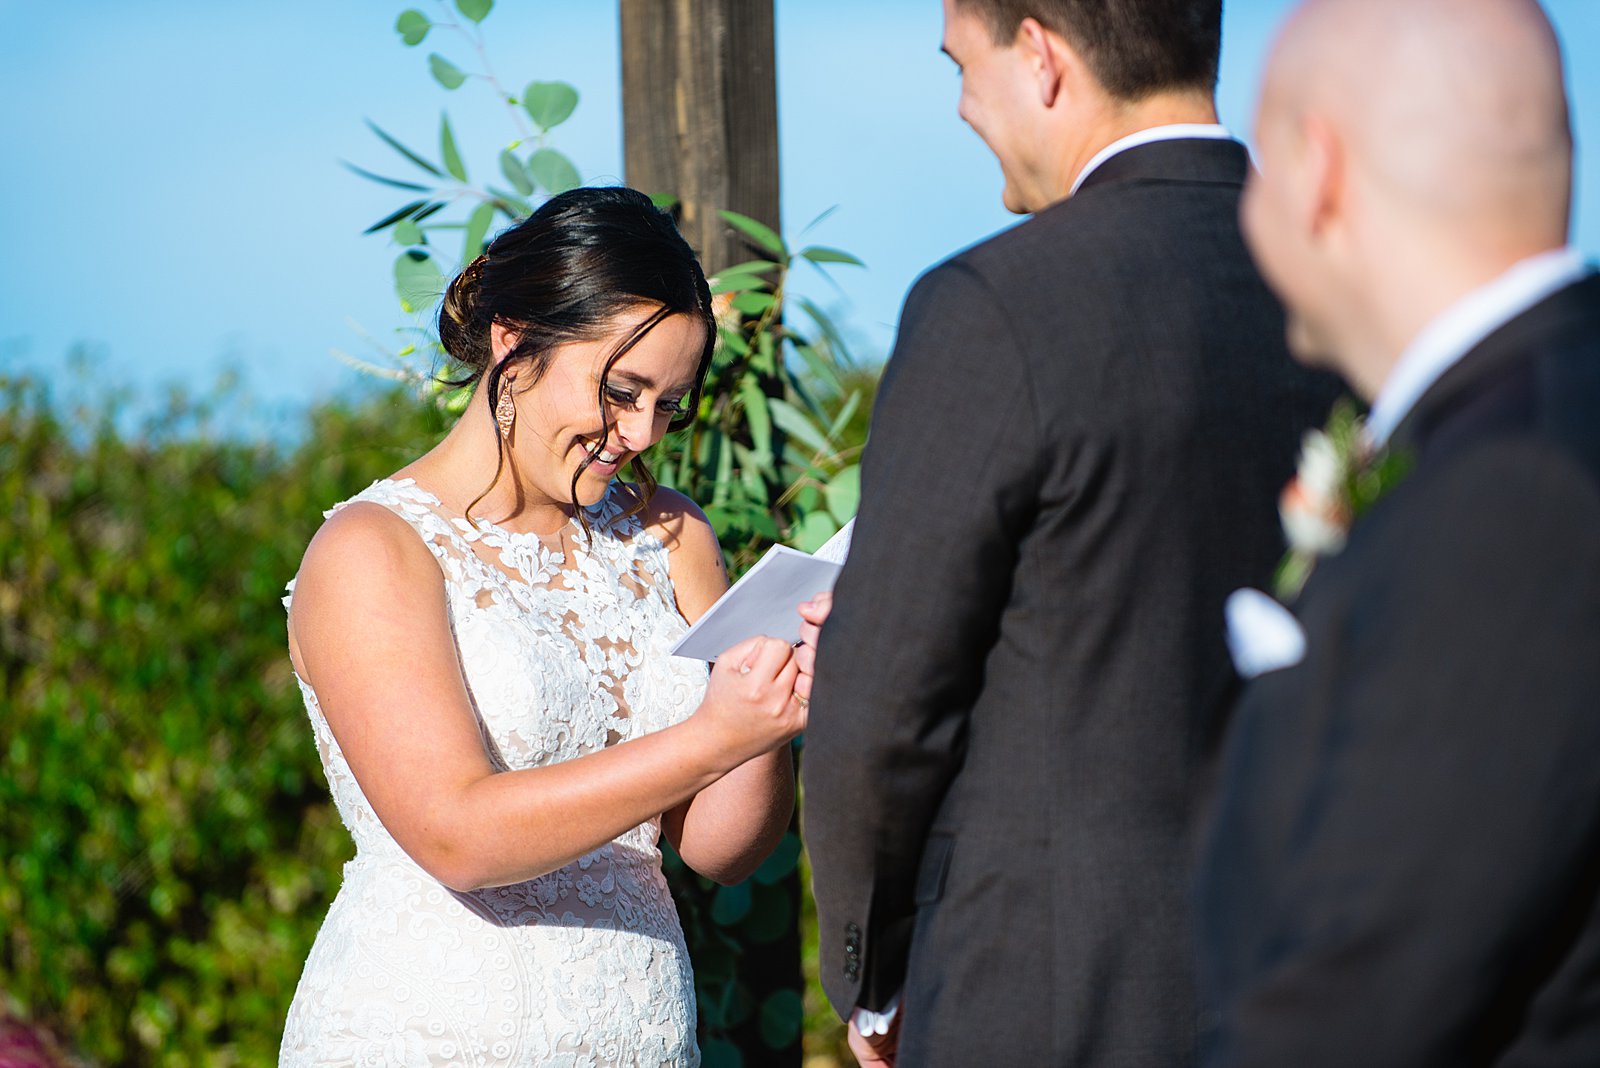 Bride laughing with her groom during their wedding ceremony at The Paseo by Apache Junction wedding photographer PMA Photography.